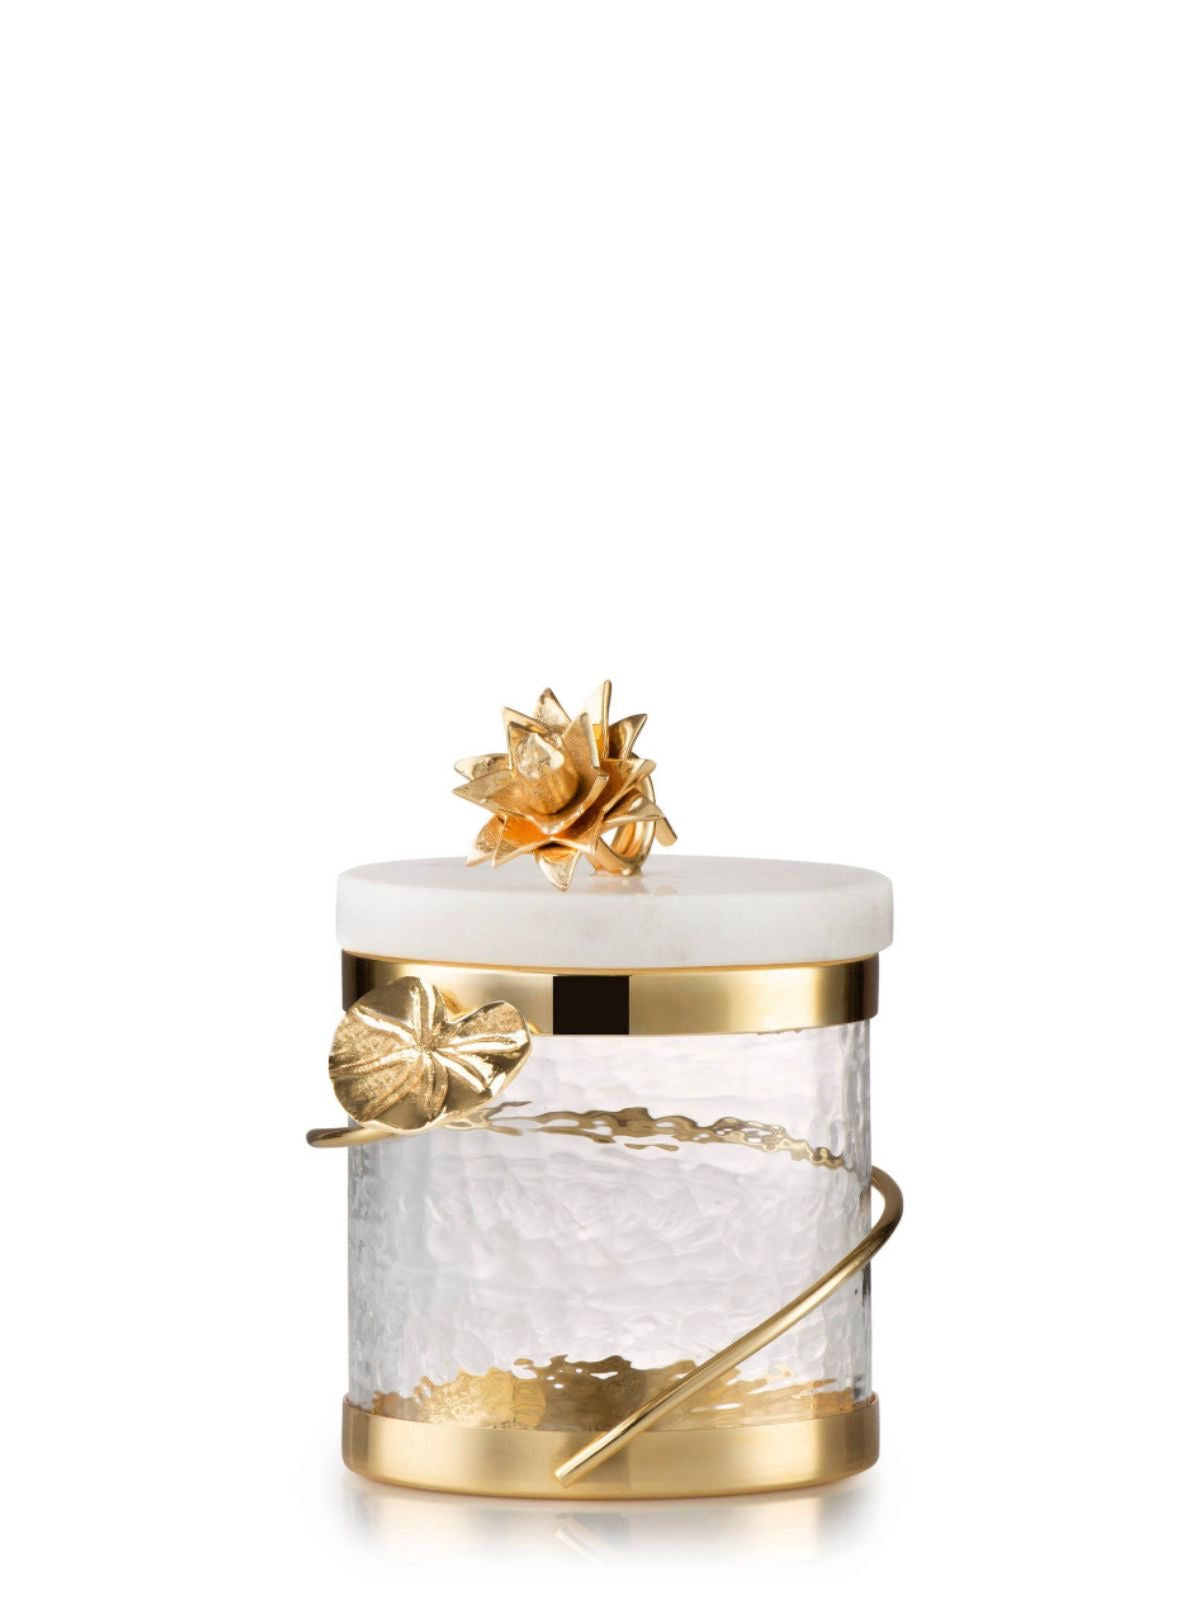 6H Luxury Glass Canister With Gold Heart and Flower Knob Design on Marble Lid - KYA Home Decor. 